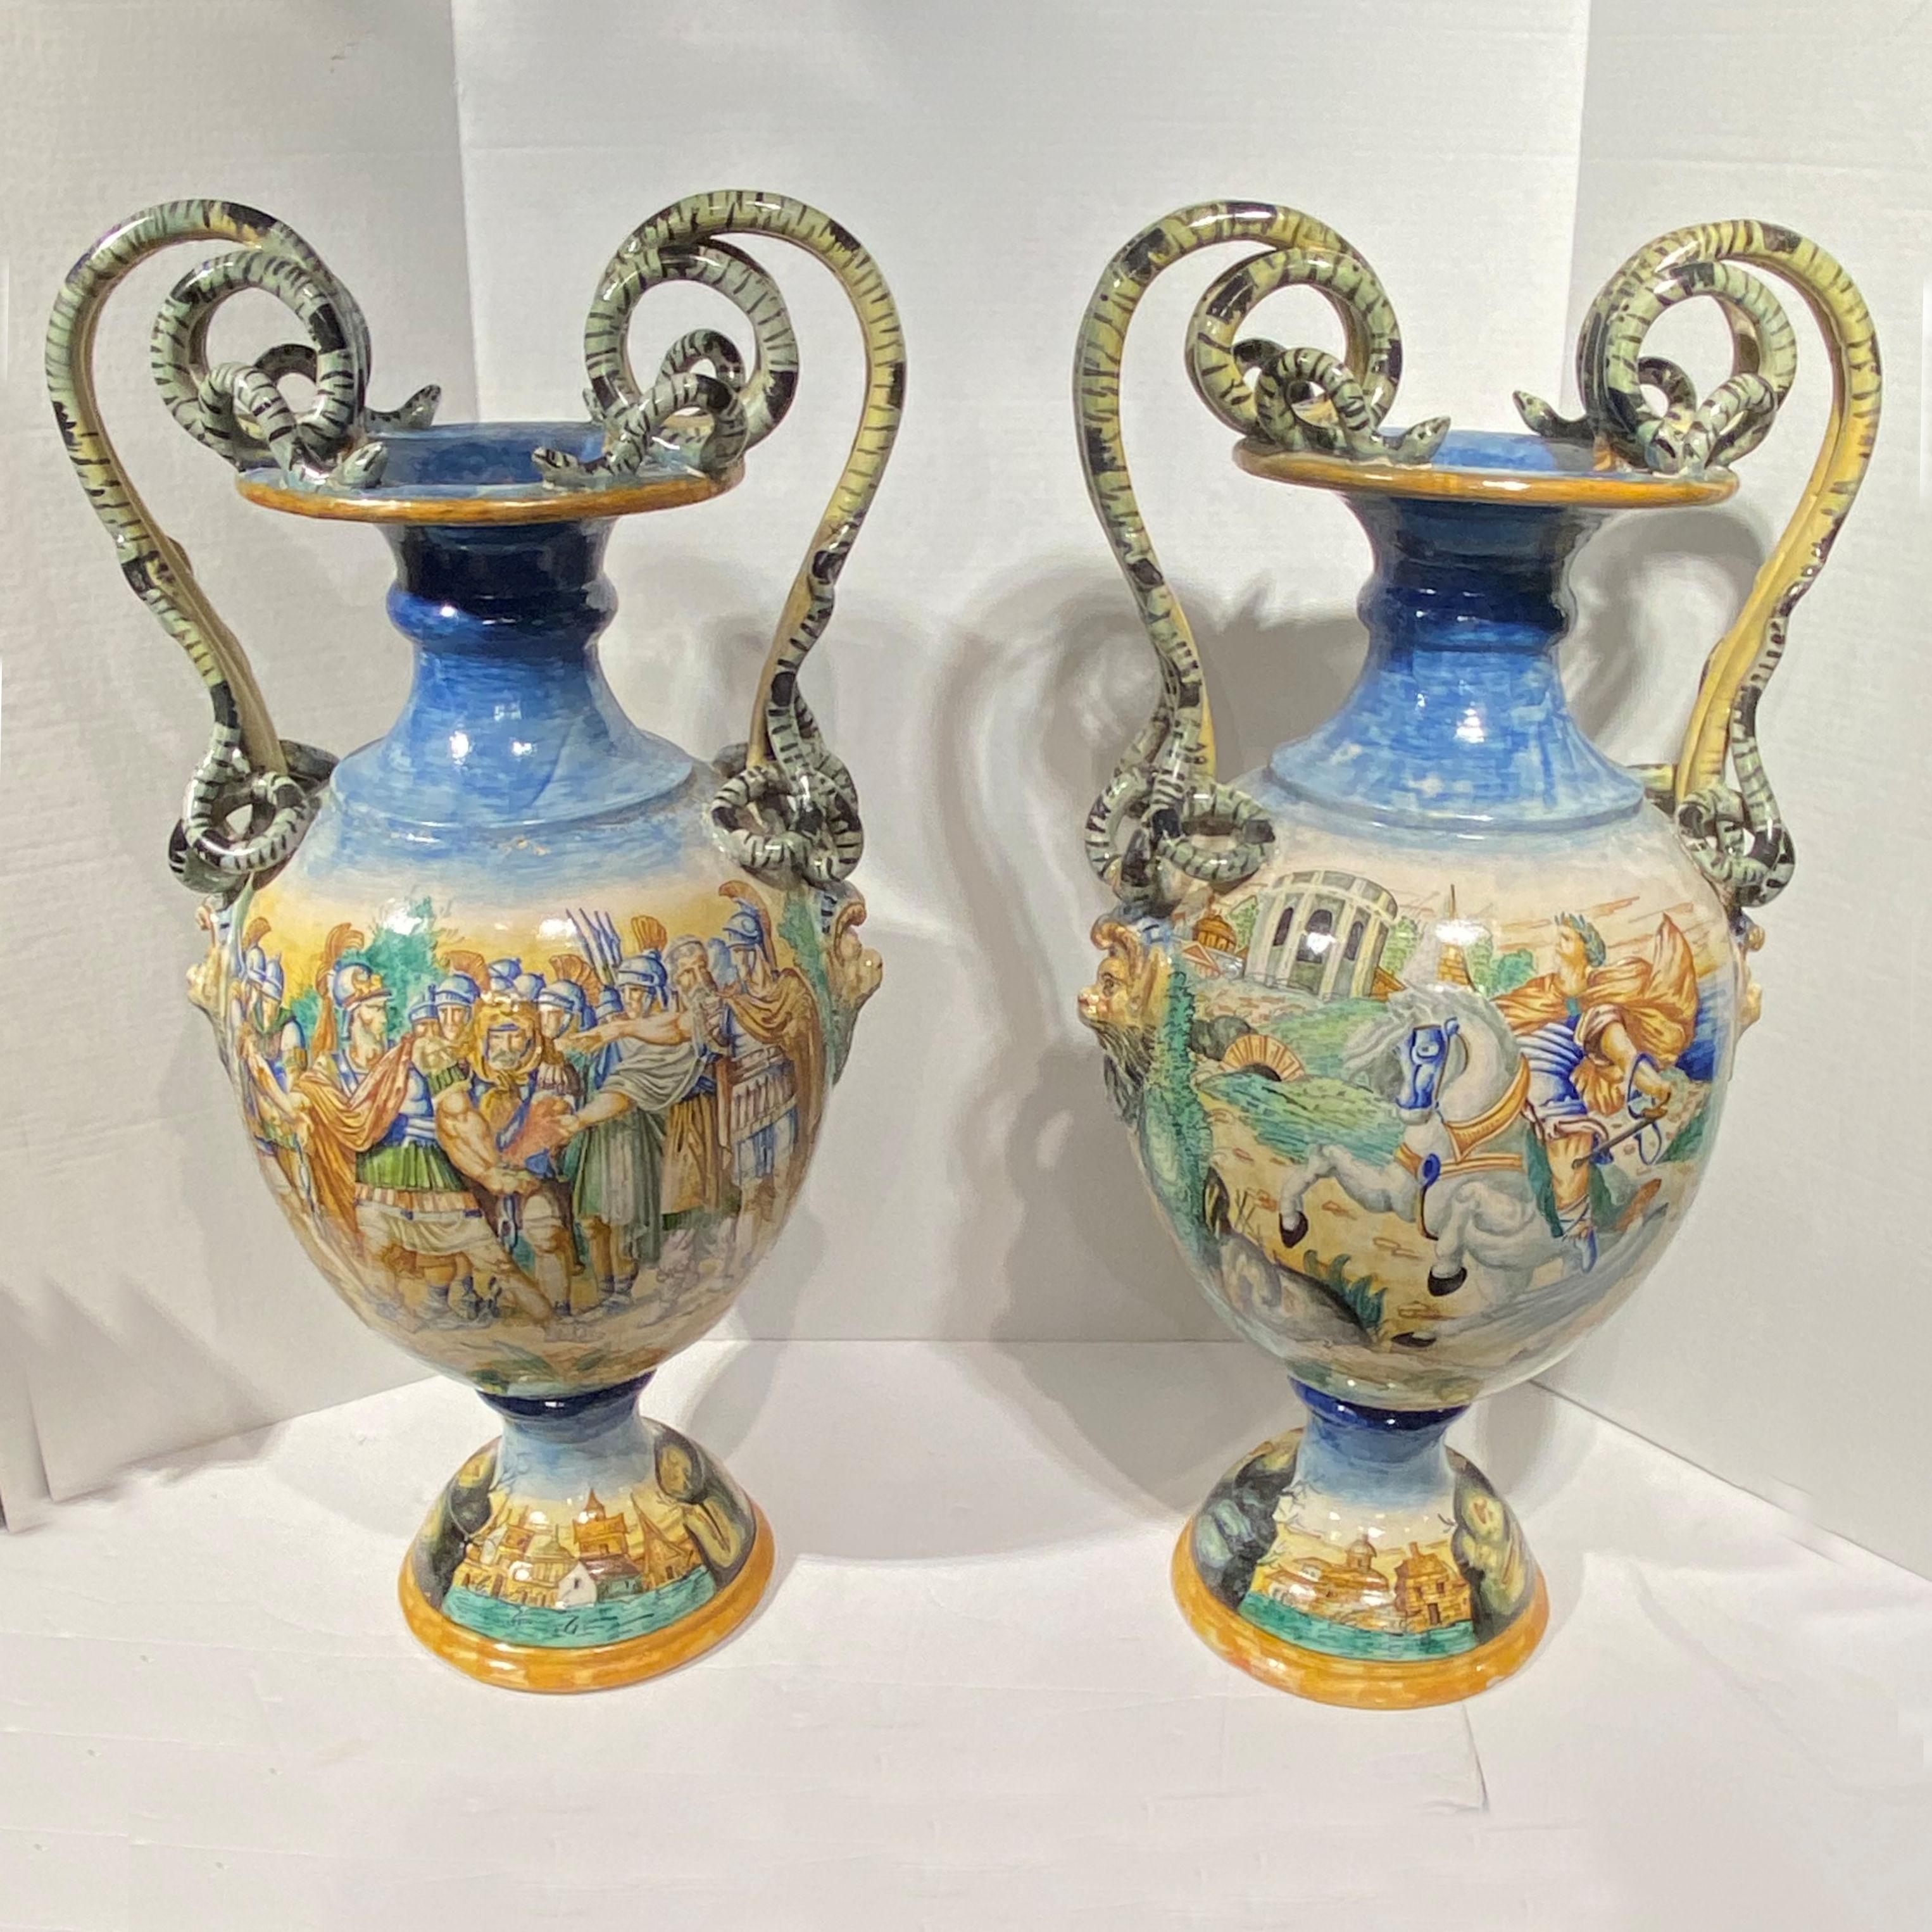 Pair of very fine quality and large 19 century Italian Roman Neoclassical Majolica Vases with snake form handles.